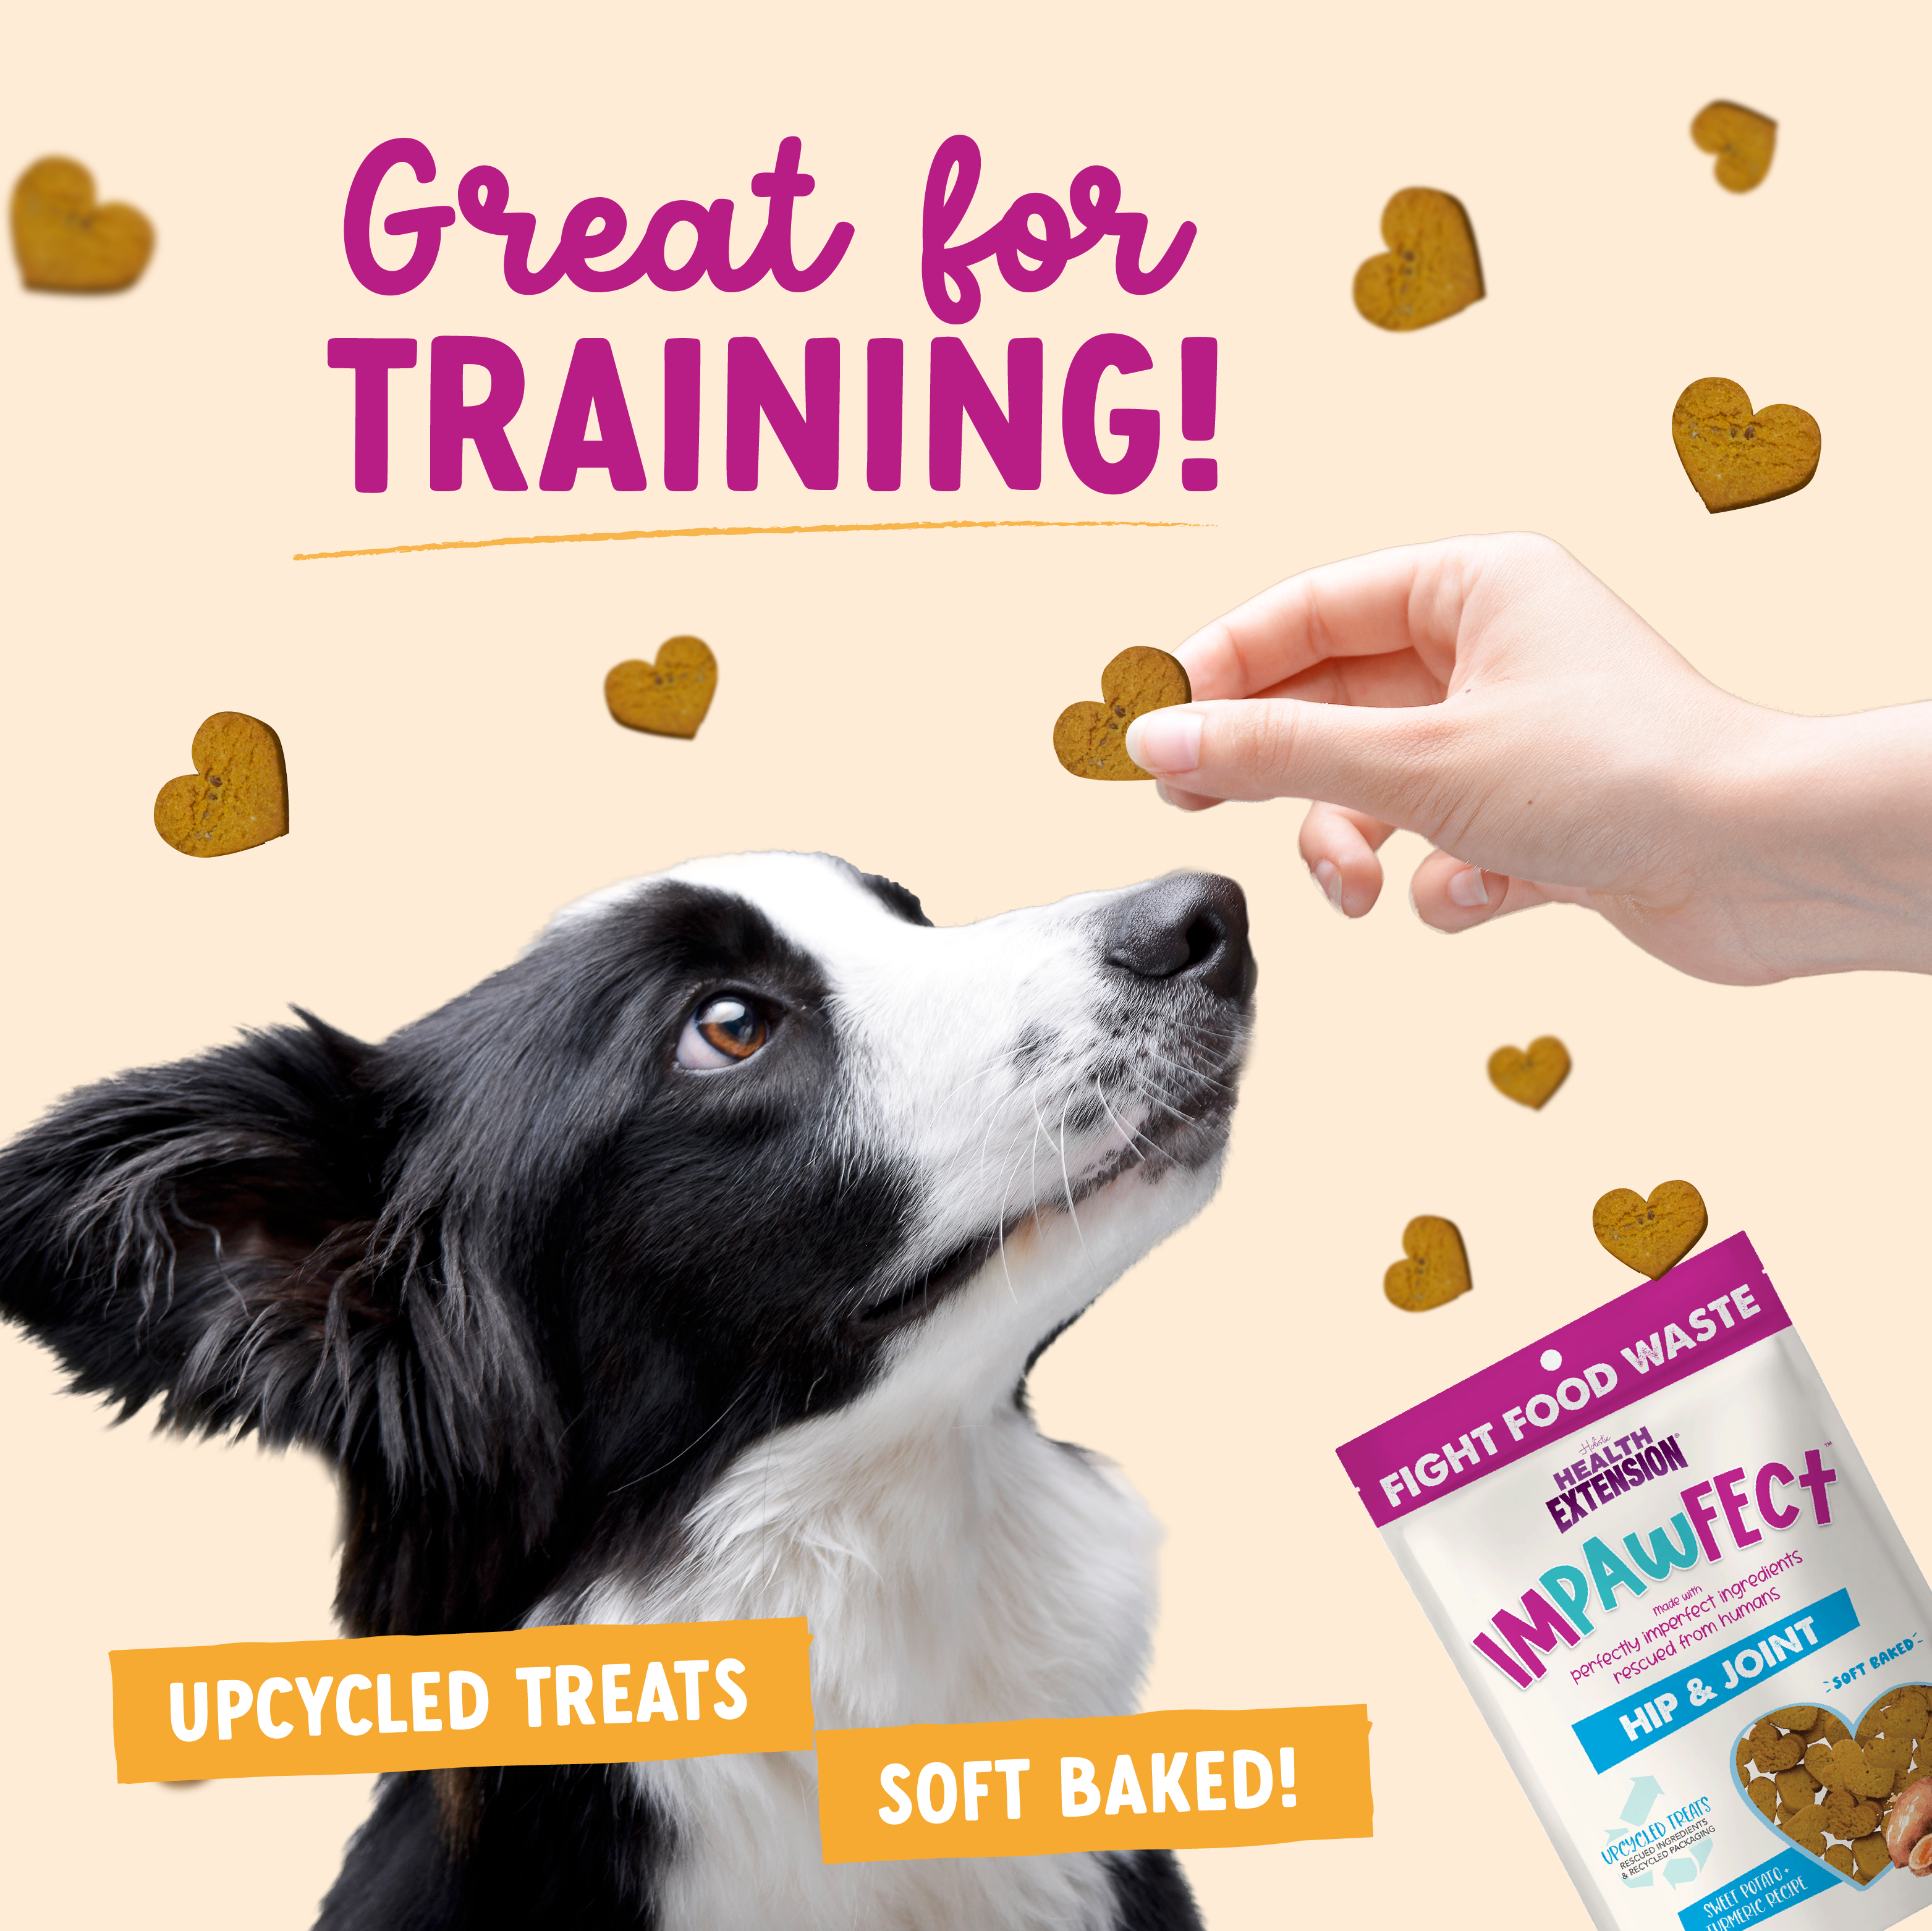 Impawfect Sweet Potato & Turmeric for Hip & Joint Support